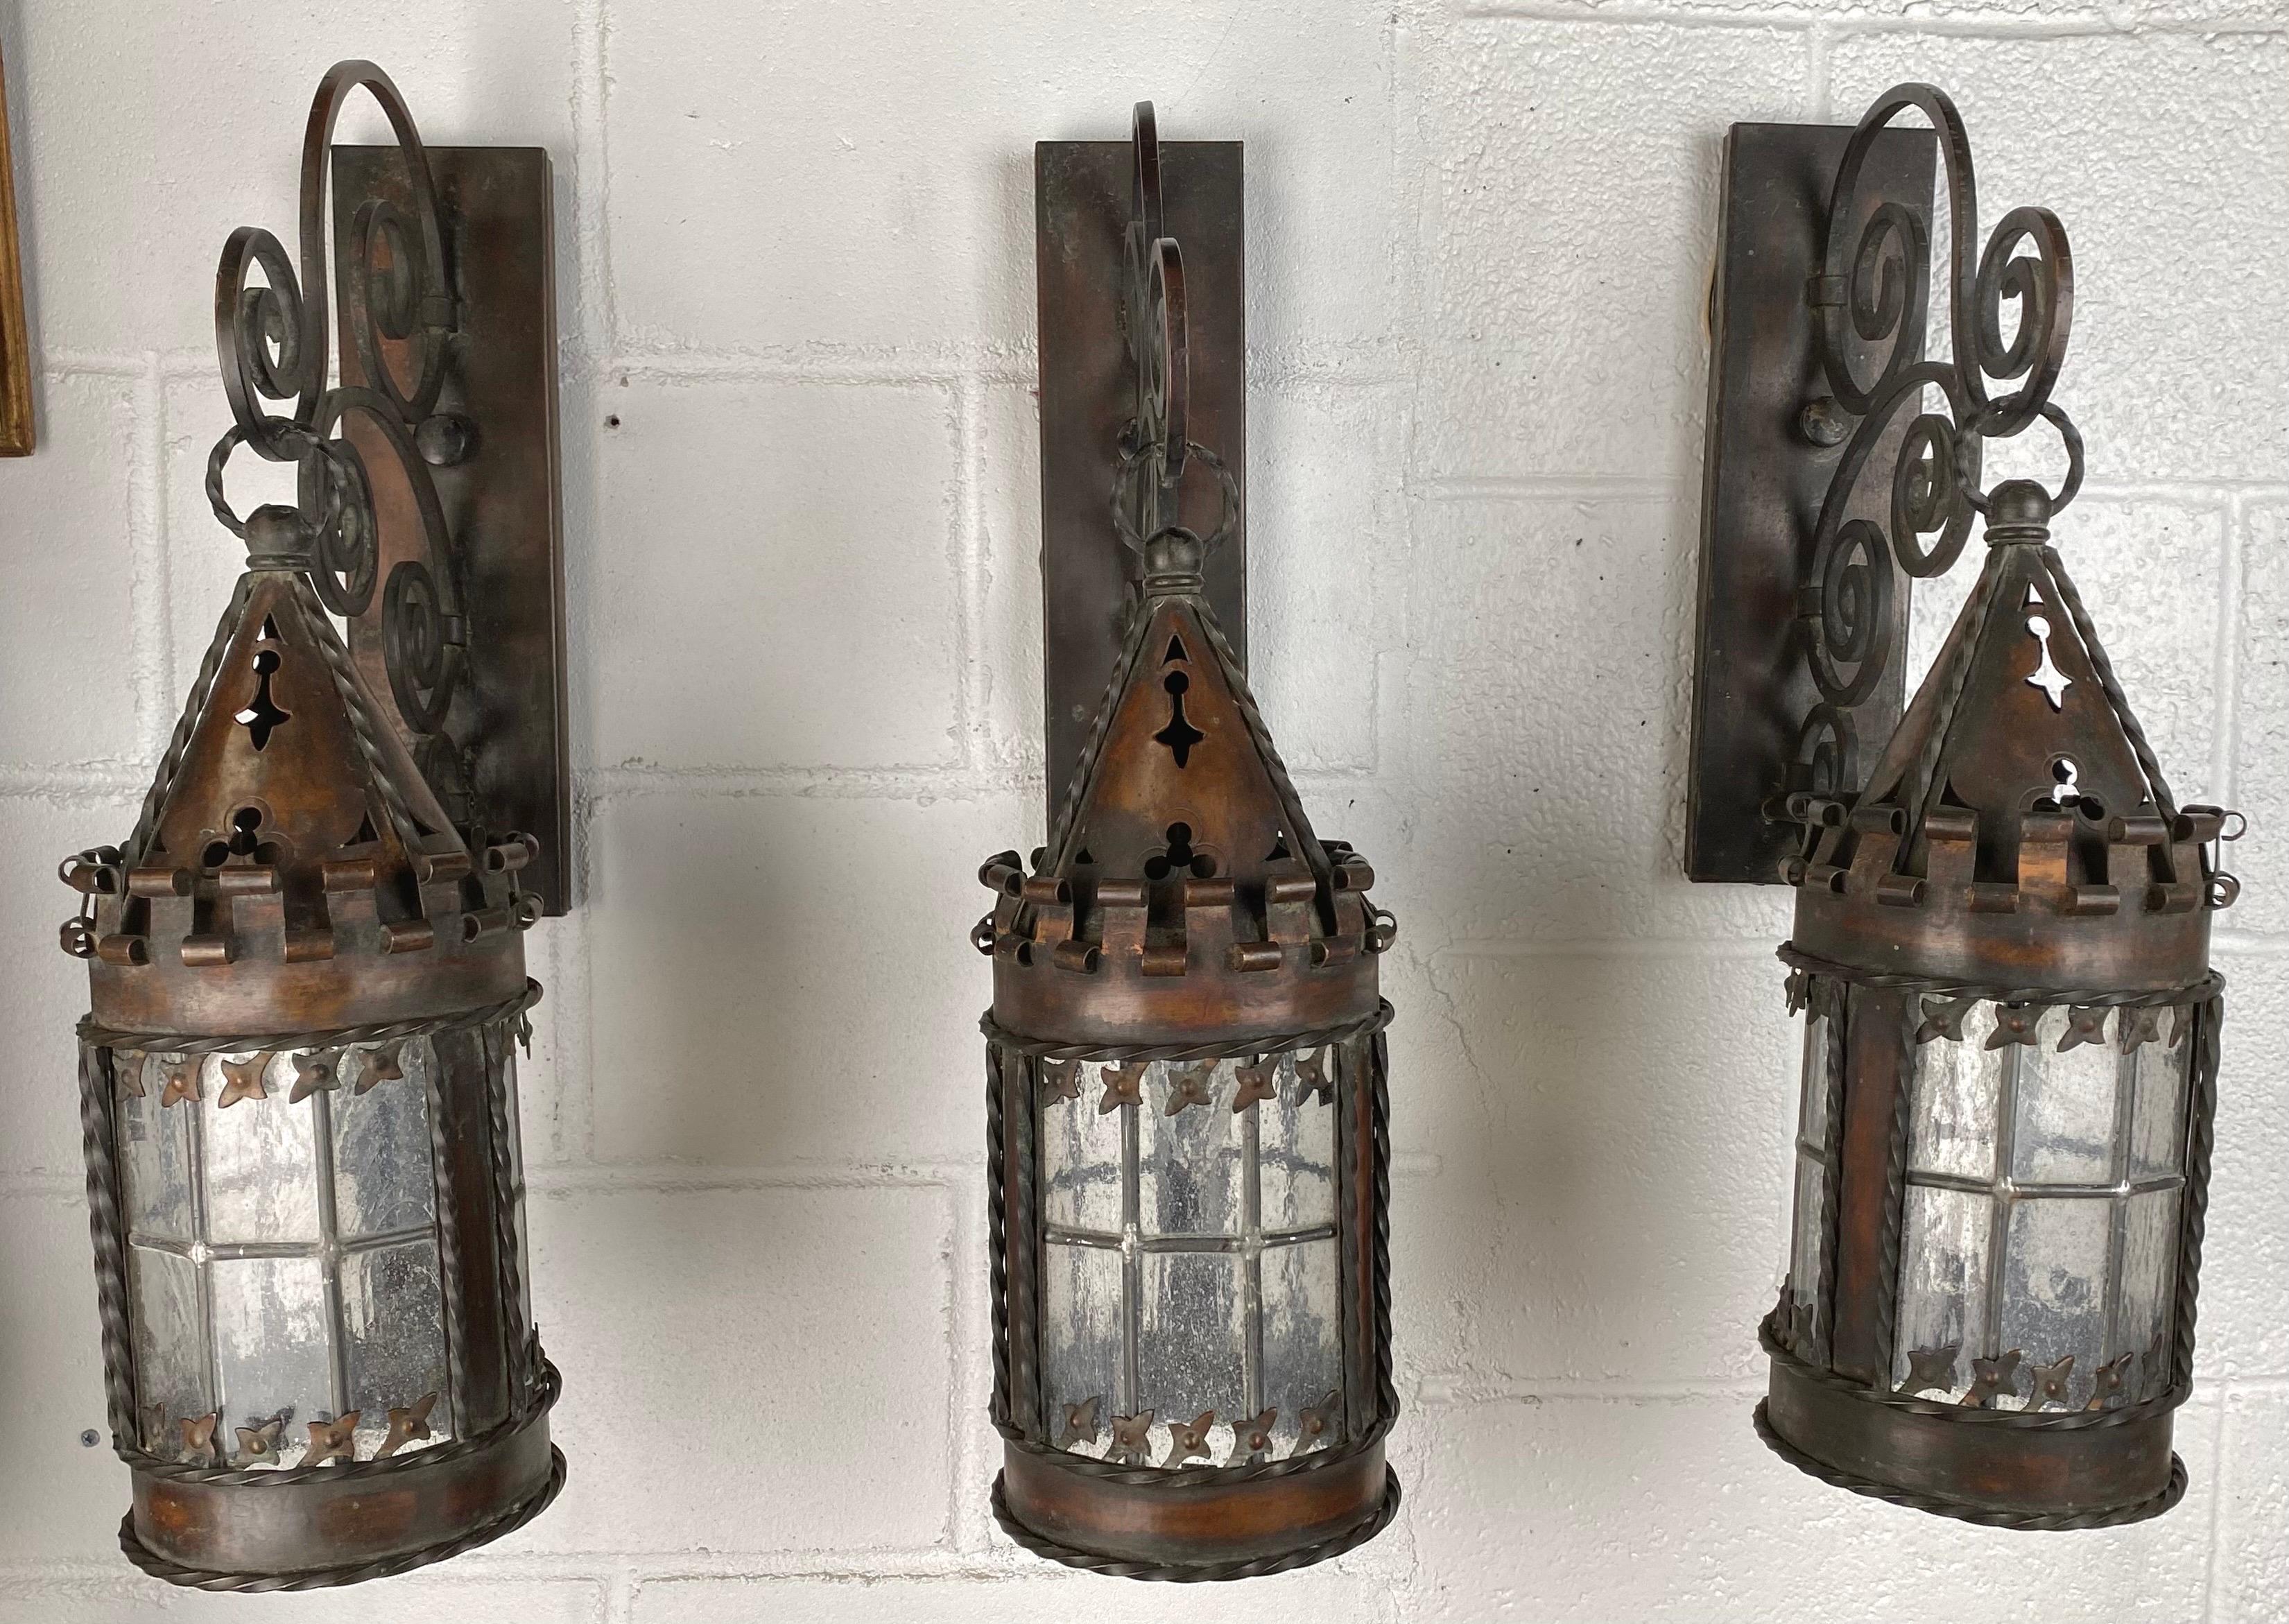 
A  timeless  set of three exquisite 19th Century Gothic Spanish Revival hand-forged wrought iron  wall sconces, a captivating trio that seamlessly melds craftsmanship and artistry. Perfect for both exterior and interior spaces, these distinguished